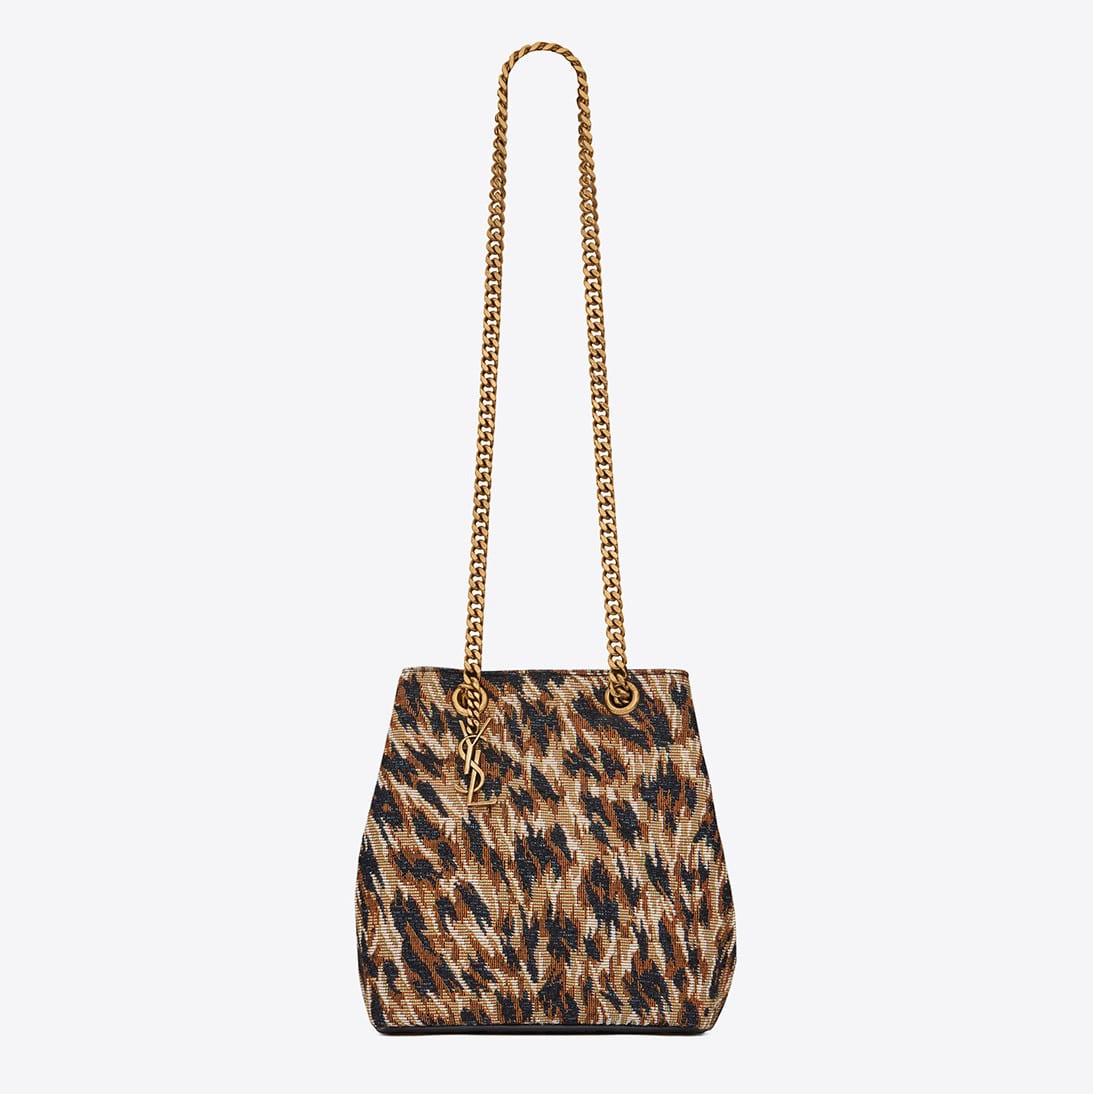 Top 10 Animal Print Bags For Fall/Winter 2016 - Spotted Fashion